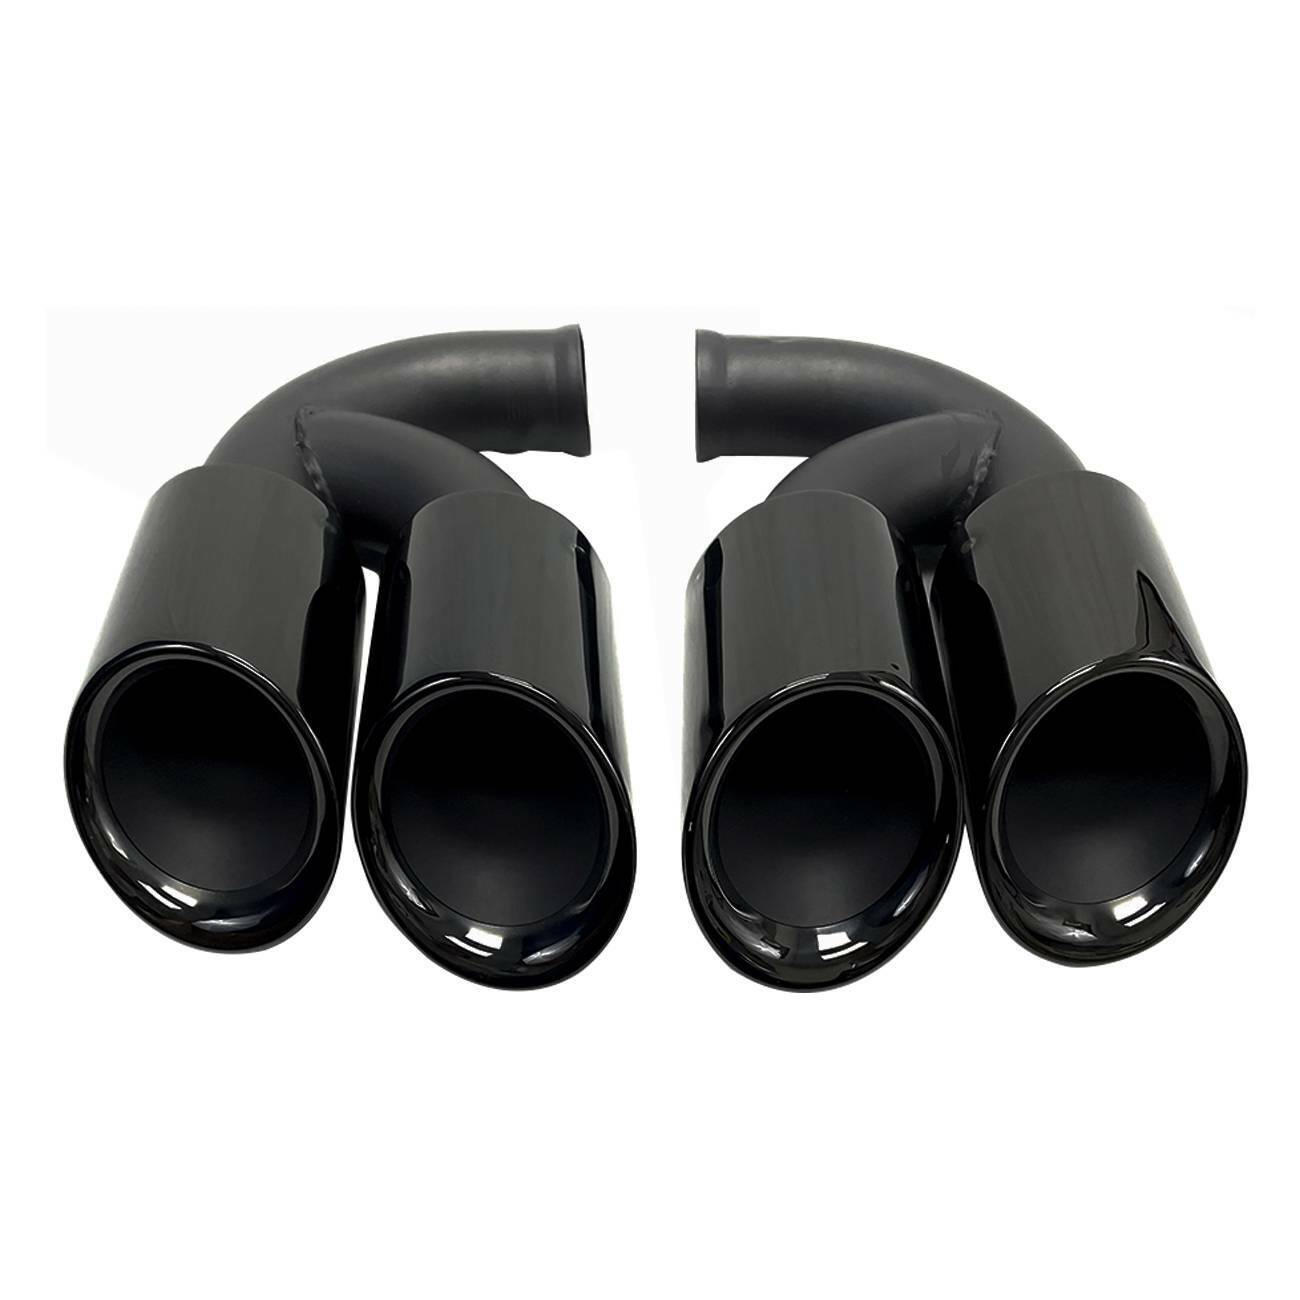 PAIR Muffler Pipe Tip For 2010-2014 Cayenne 958 Round V6 V8 Gas Stainless Steel